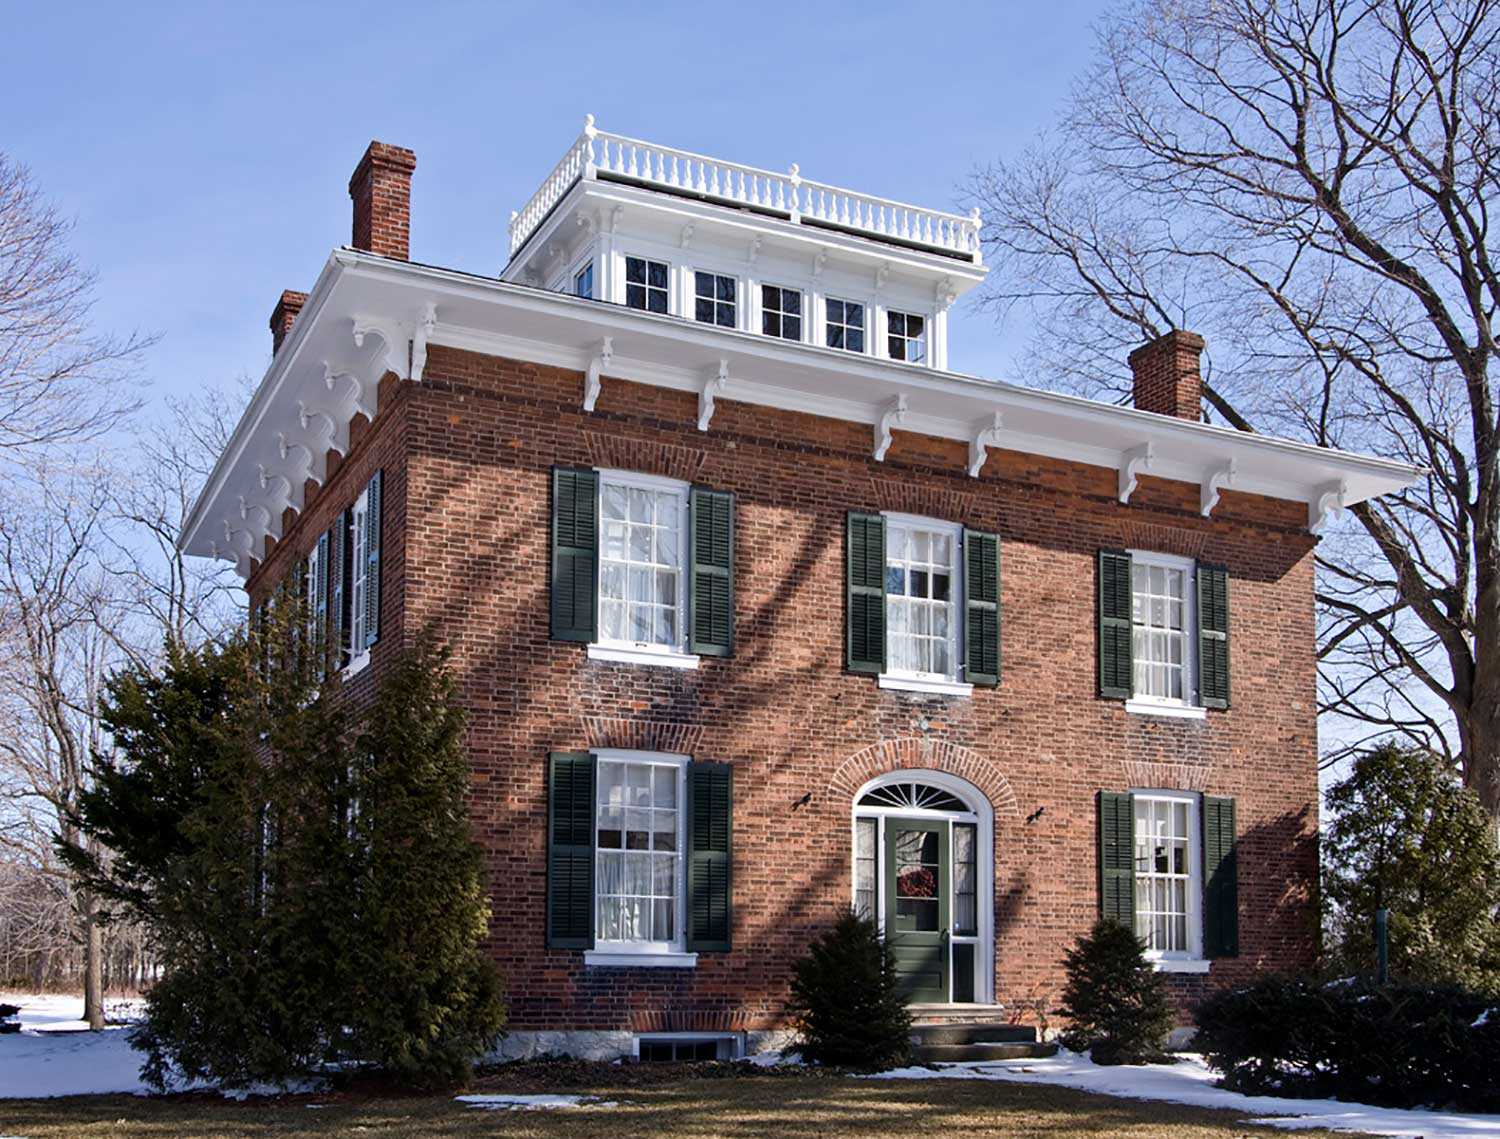 Hill House, built circa 1855 by Hiram Hill, owner of the Morpeth Dockyard. This Italianate residence provides confirmation of the affluence early Great Lakes shipping and Chatham-Kent agriculture created for people in the mid-19th century. (Photo: Dan Reaume)